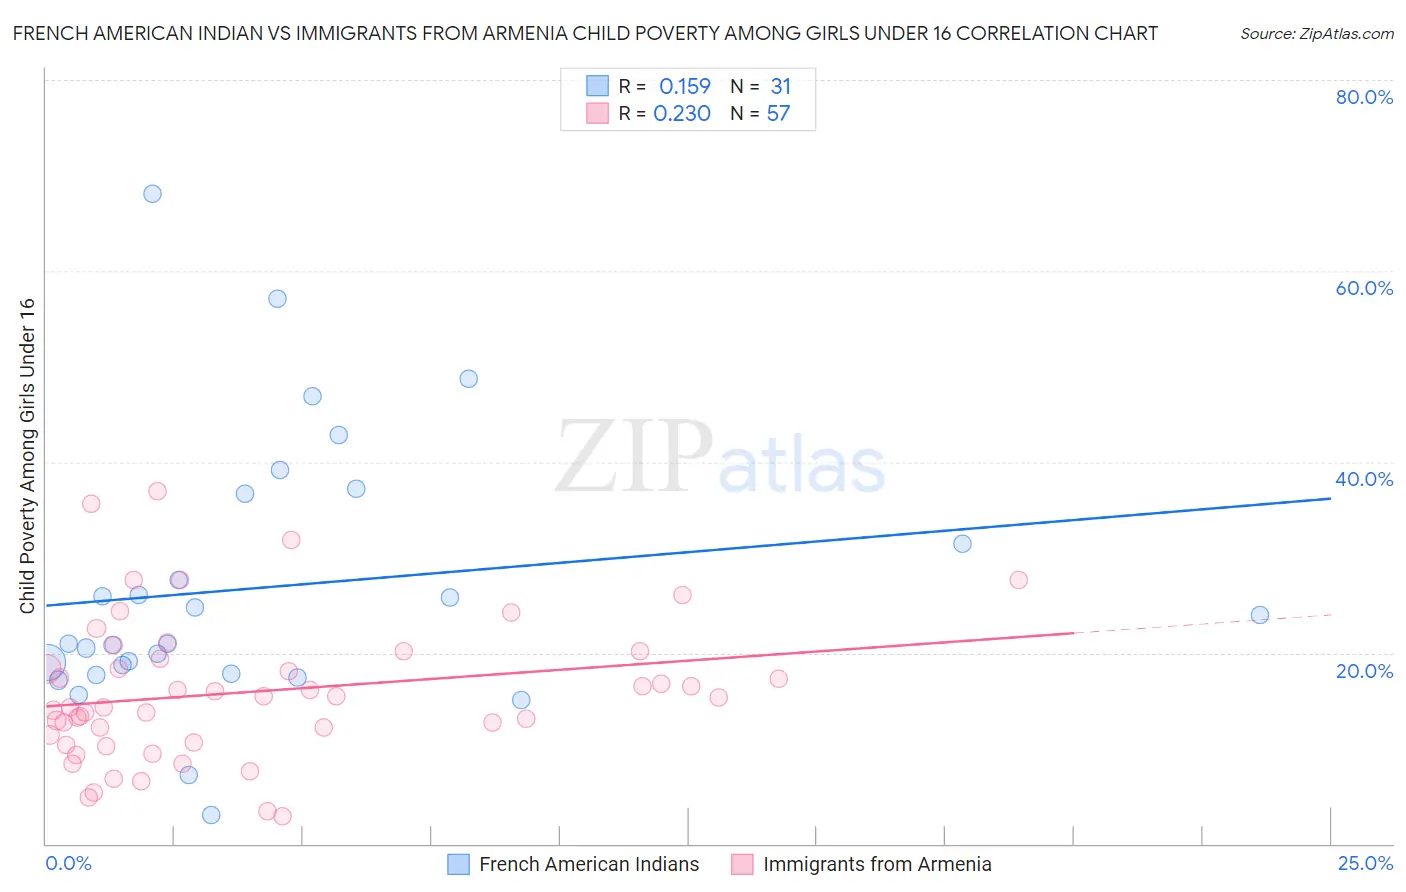 French American Indian vs Immigrants from Armenia Child Poverty Among Girls Under 16